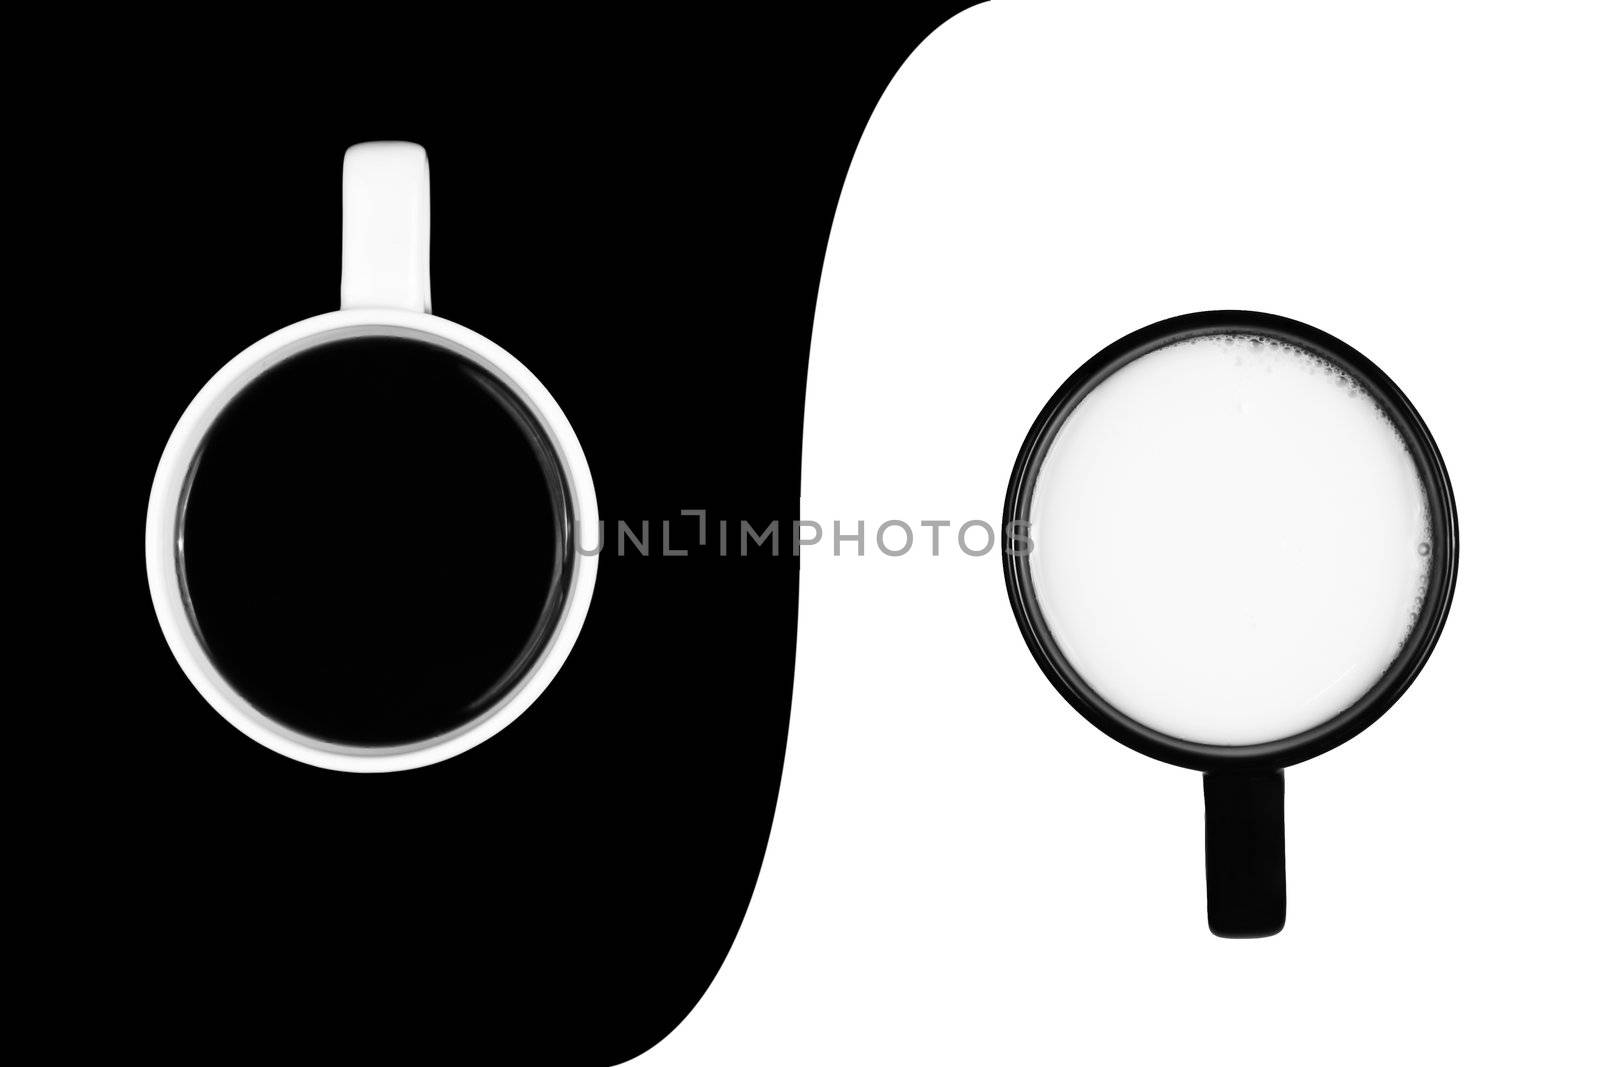 A white cup of black coffe on black background and a black cup of white milk on a white background, separated by a curved border